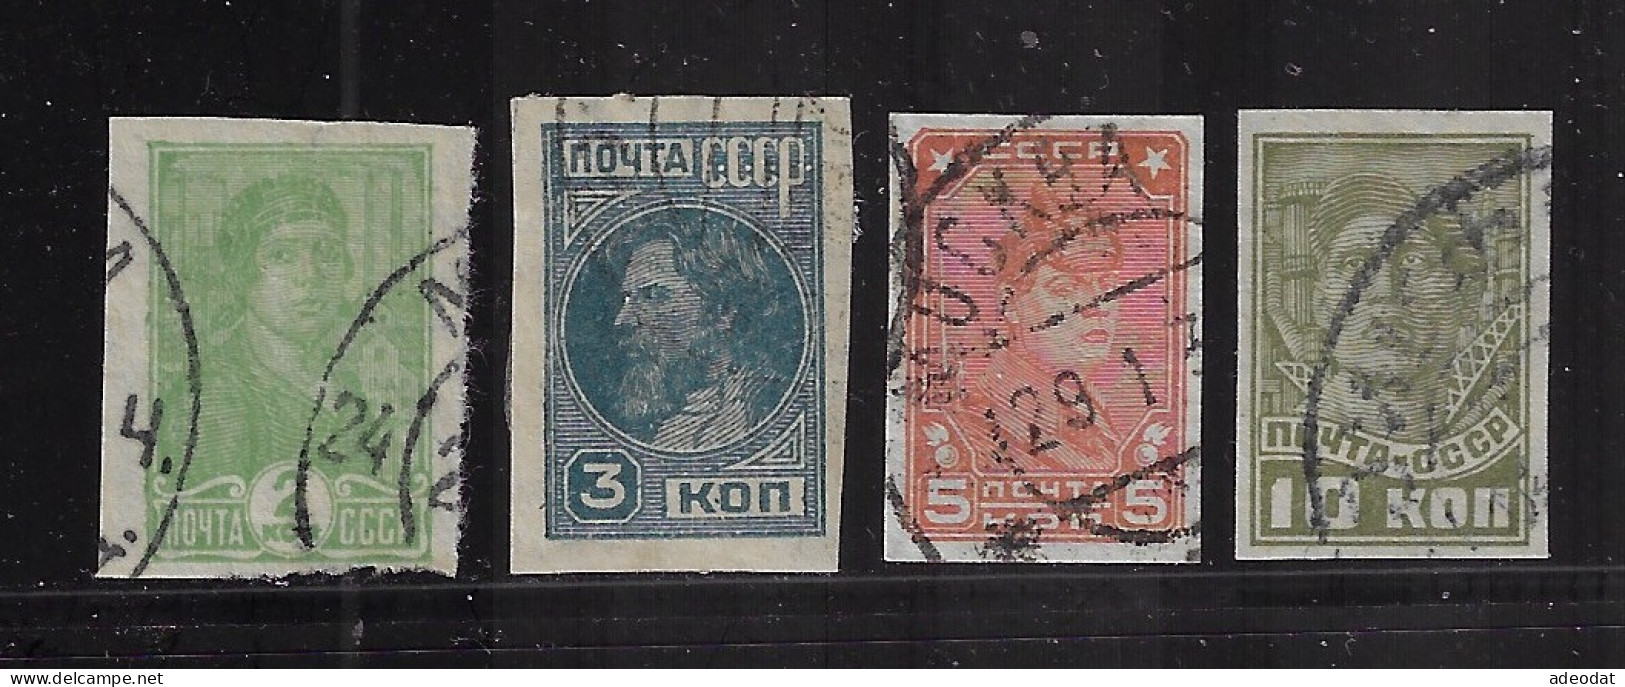 RUSSIA 1929-1931 SCOTT #457,458,460-462 USED - Used Stamps